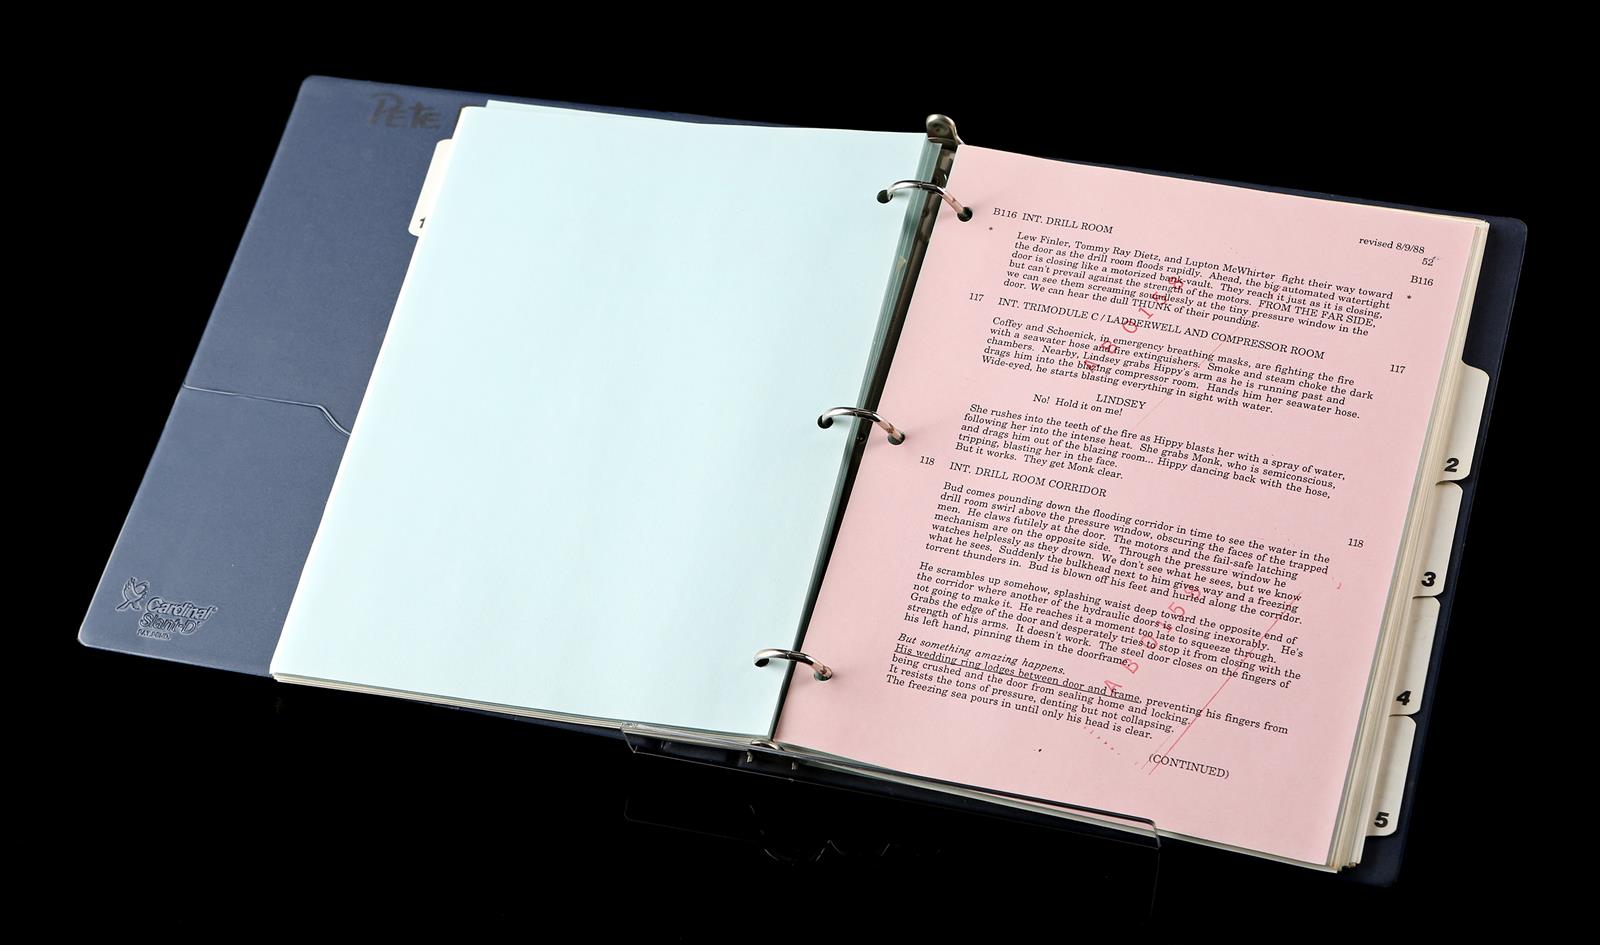 THE ABYSS (1989) - Script Binder and Underwater Slate A script binder and underwater slate from - Image 3 of 12